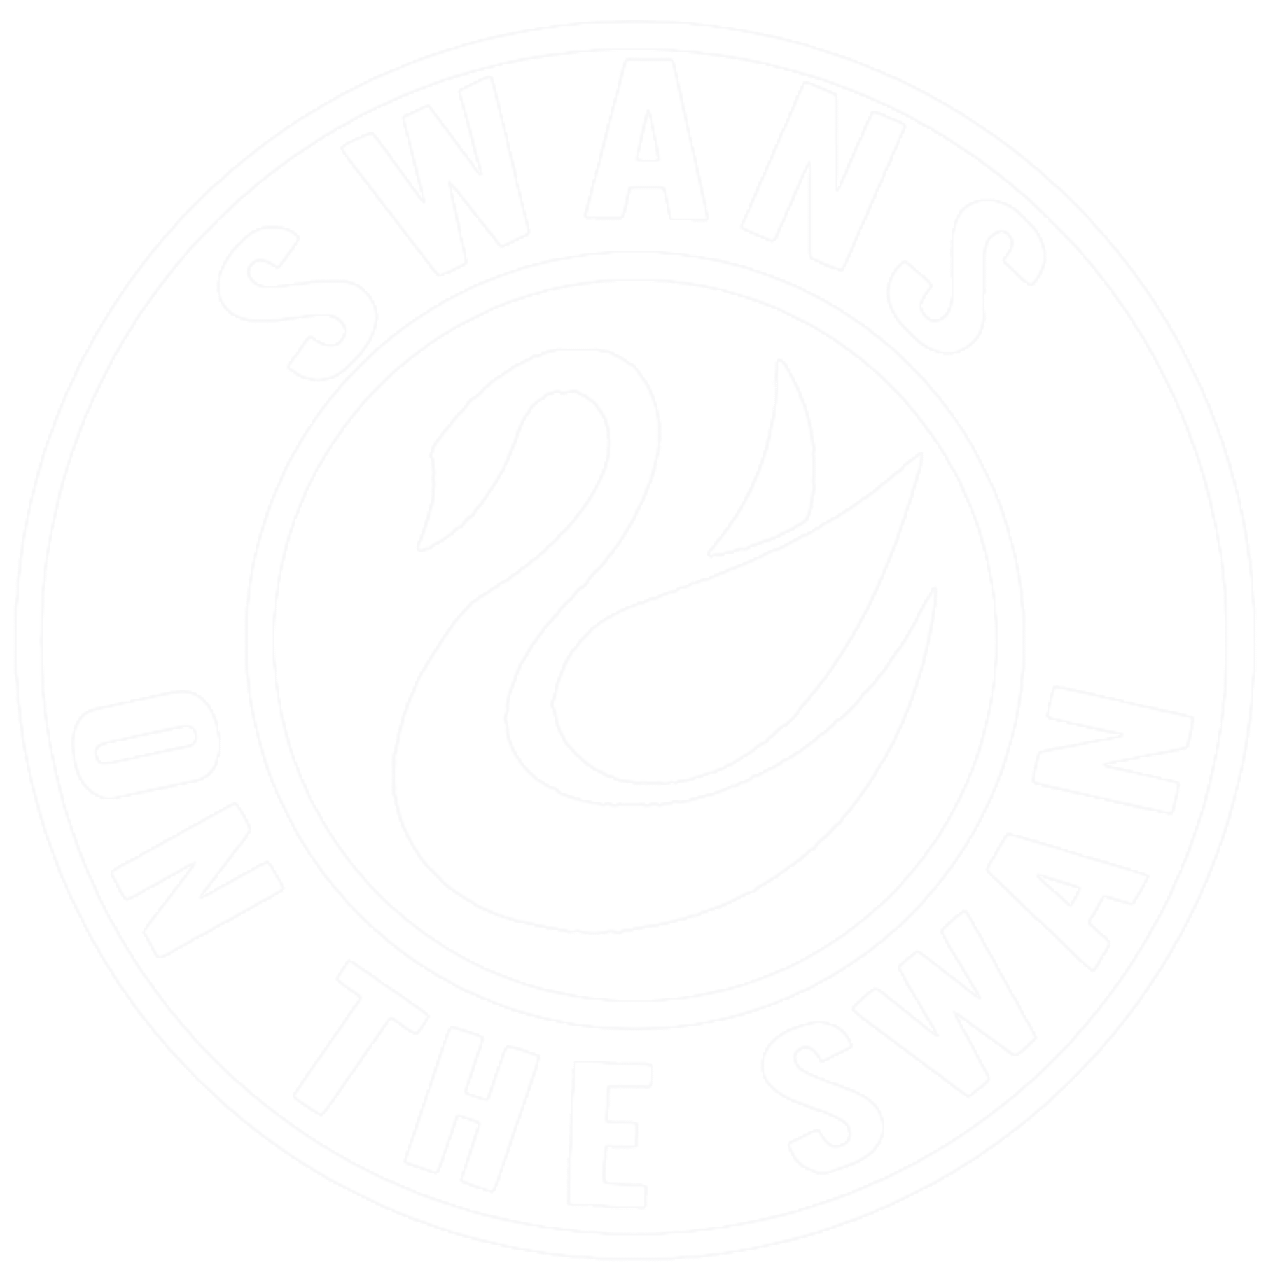 Swans On The Swan | Kayak Hire | SUP Board Hire | Swan River | Perth